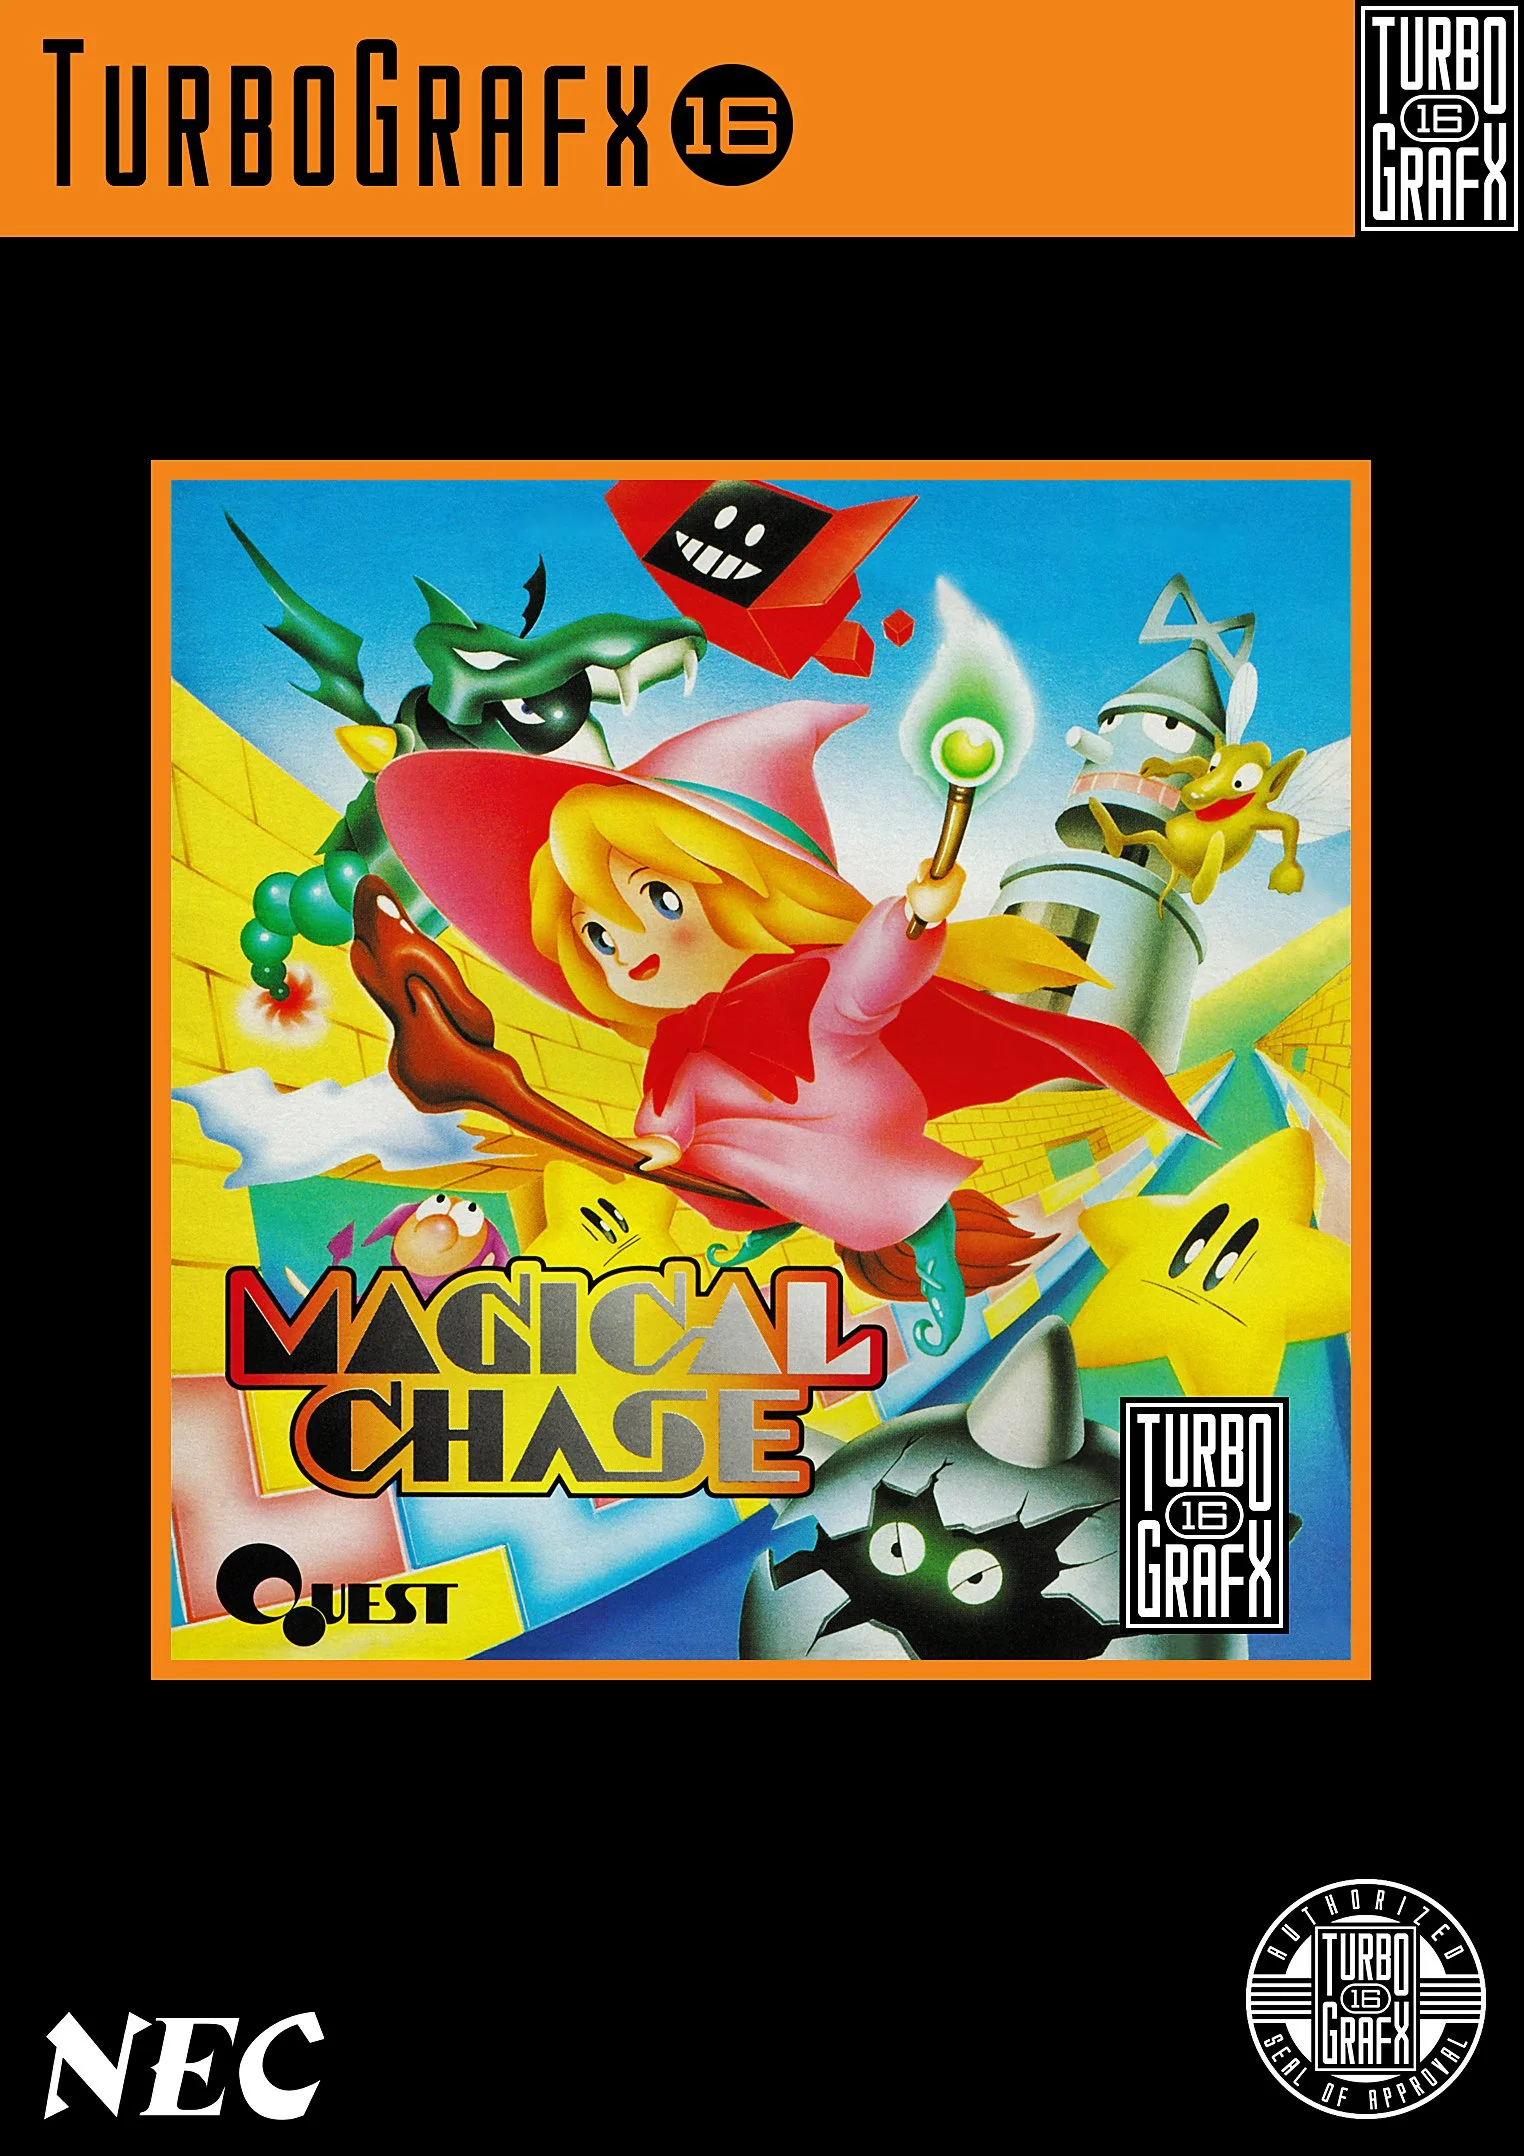 Magical Chase